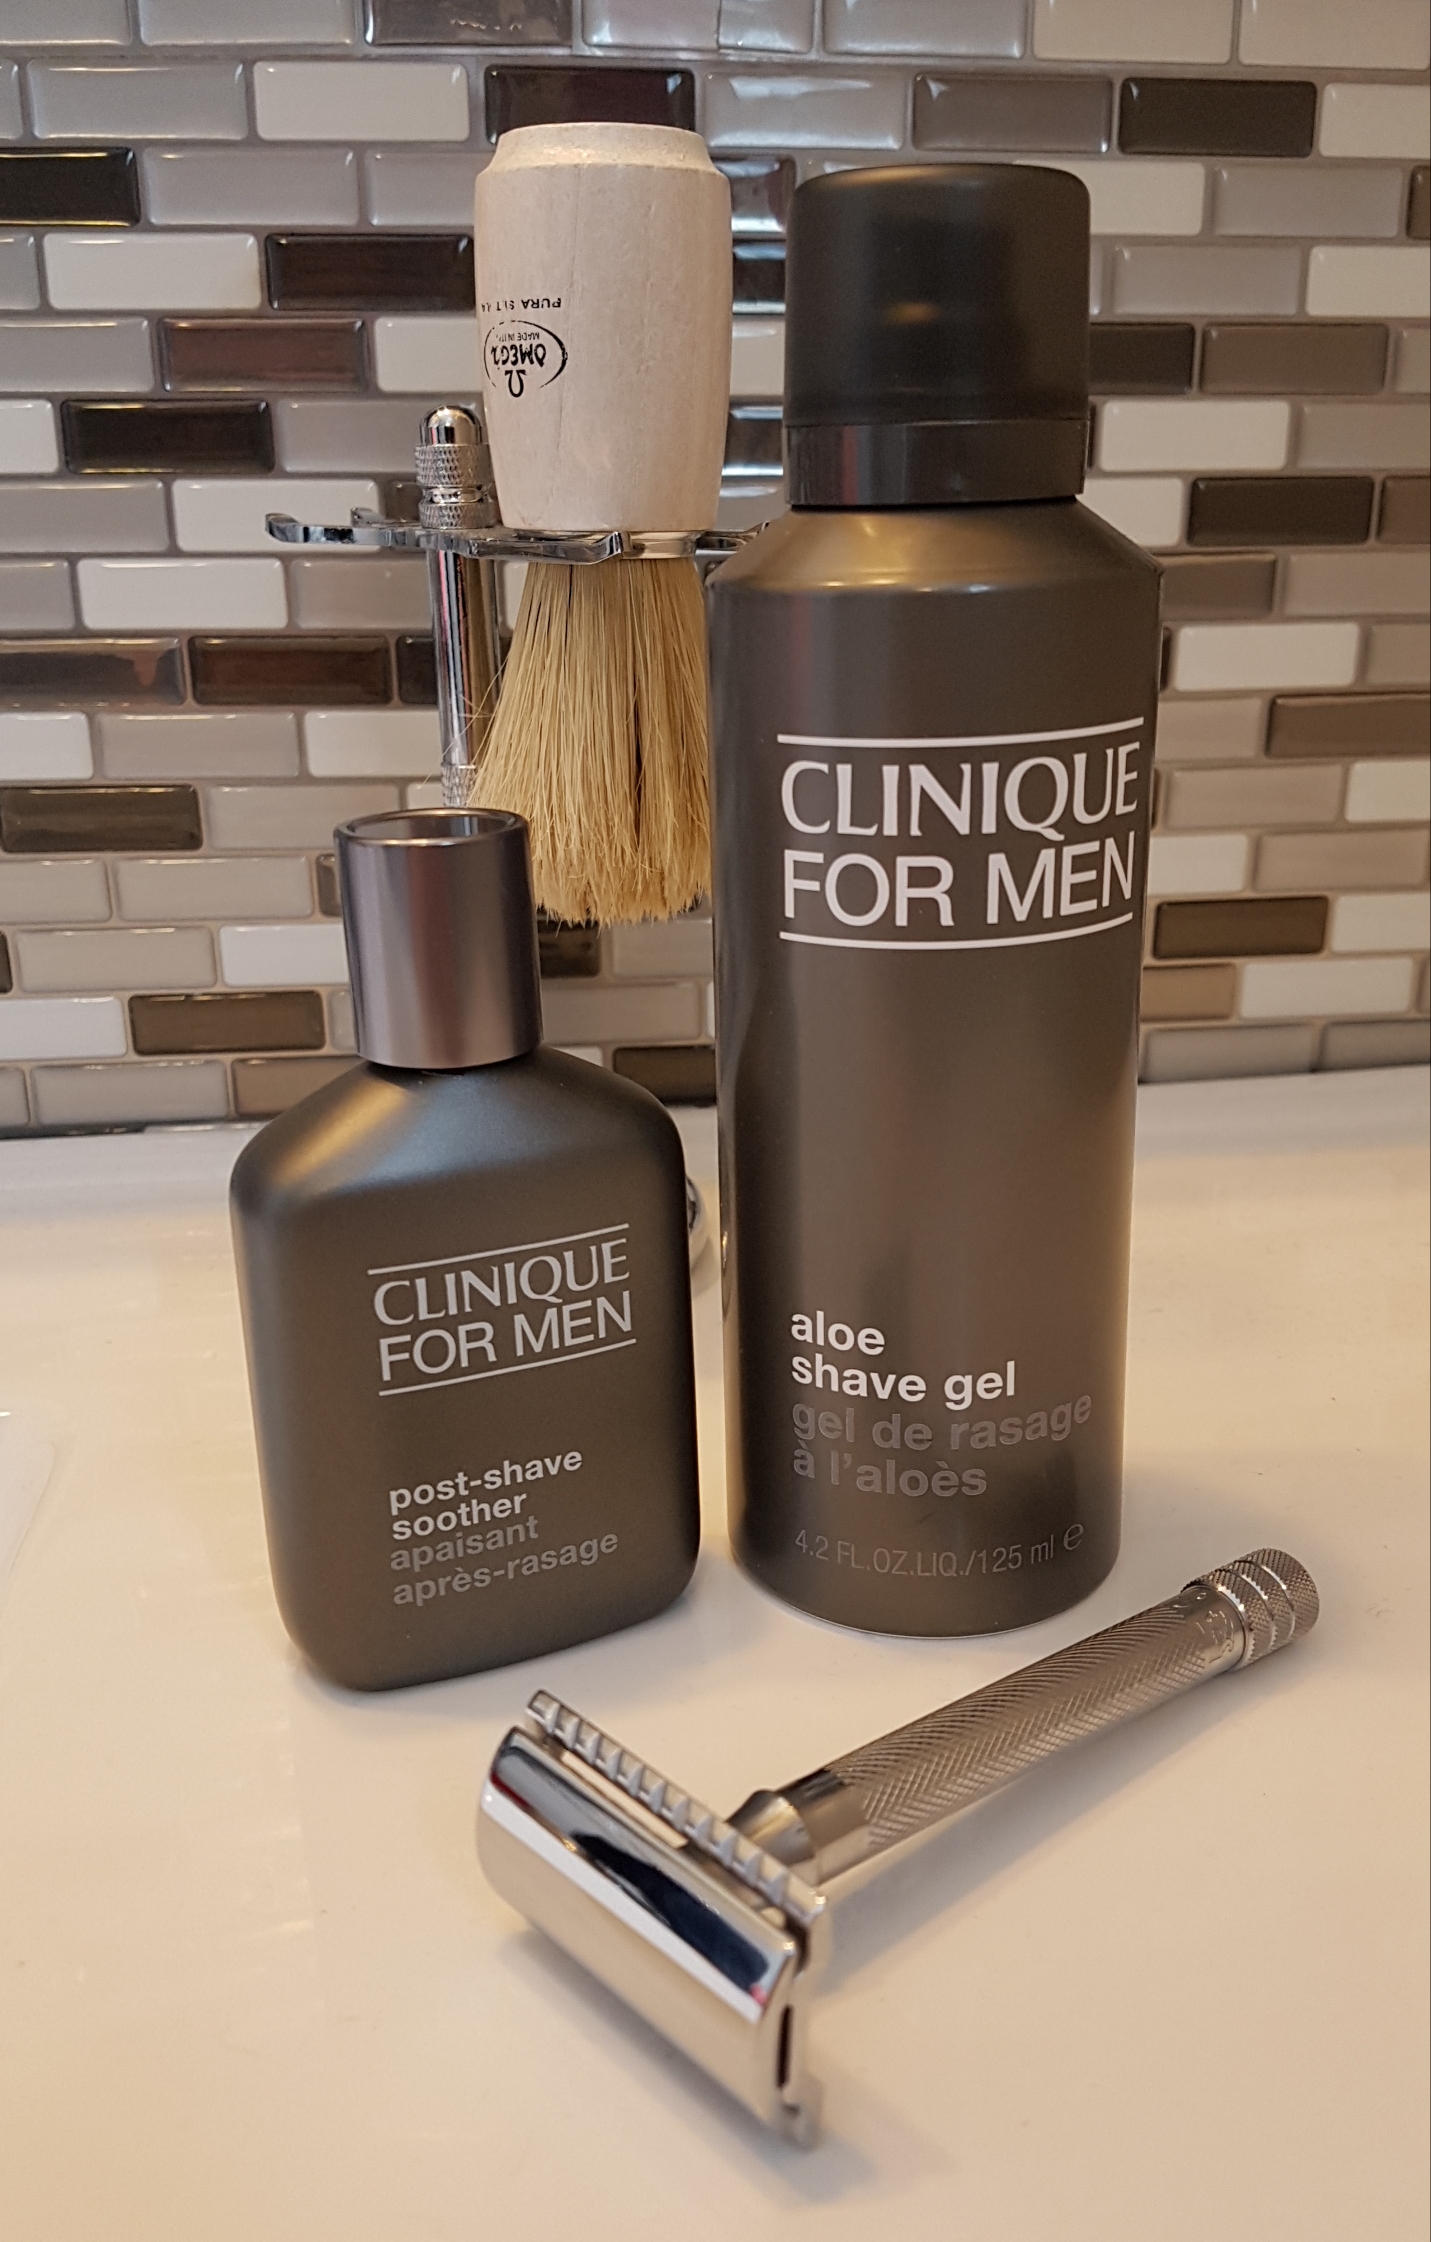 Clinique Shaving Products For Men